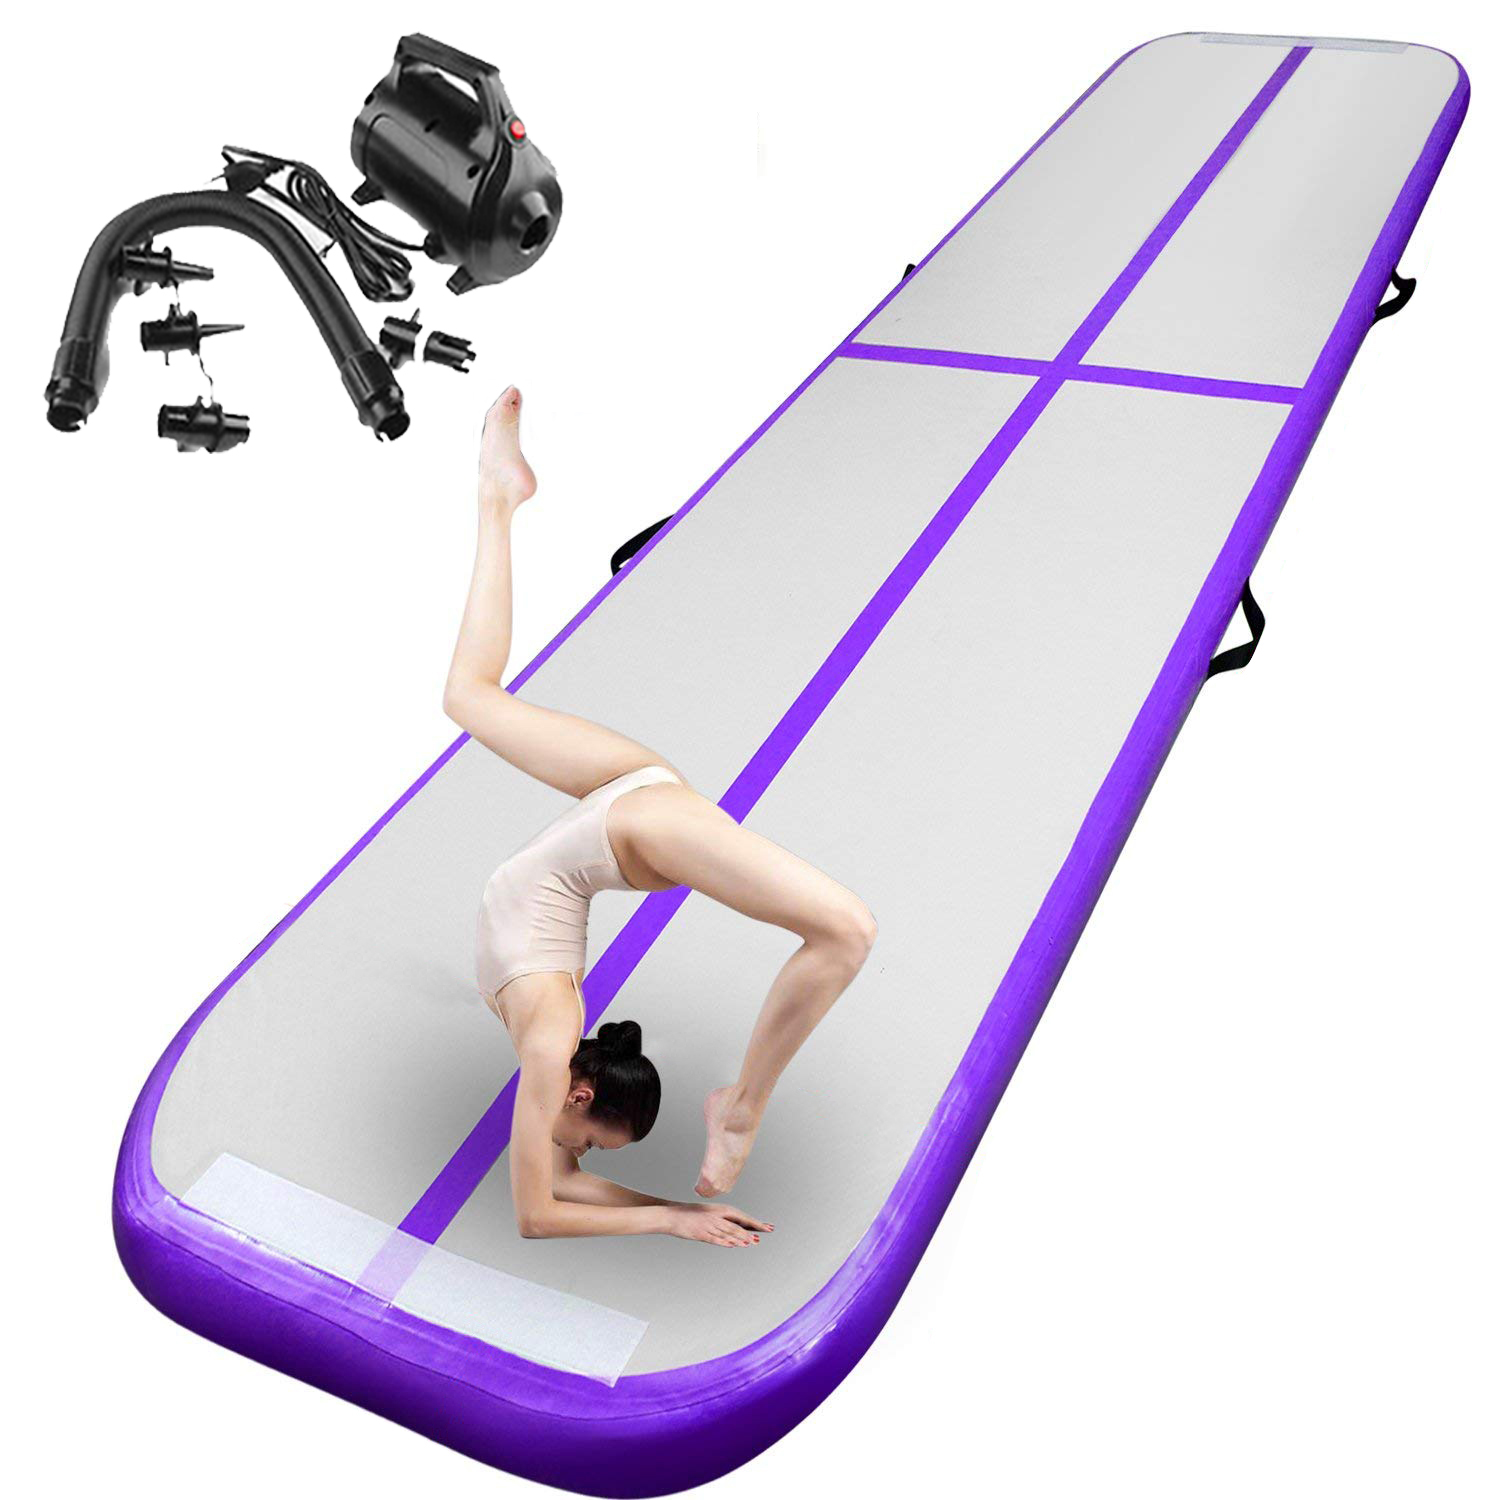 bigzzia Air Track Inflatable Gymnastics Tumbling Floor Mat,Tumble Track Air Mat,Home Use Air Tracks with Electric Air Pump for Kids/Gym/Training/Pool 